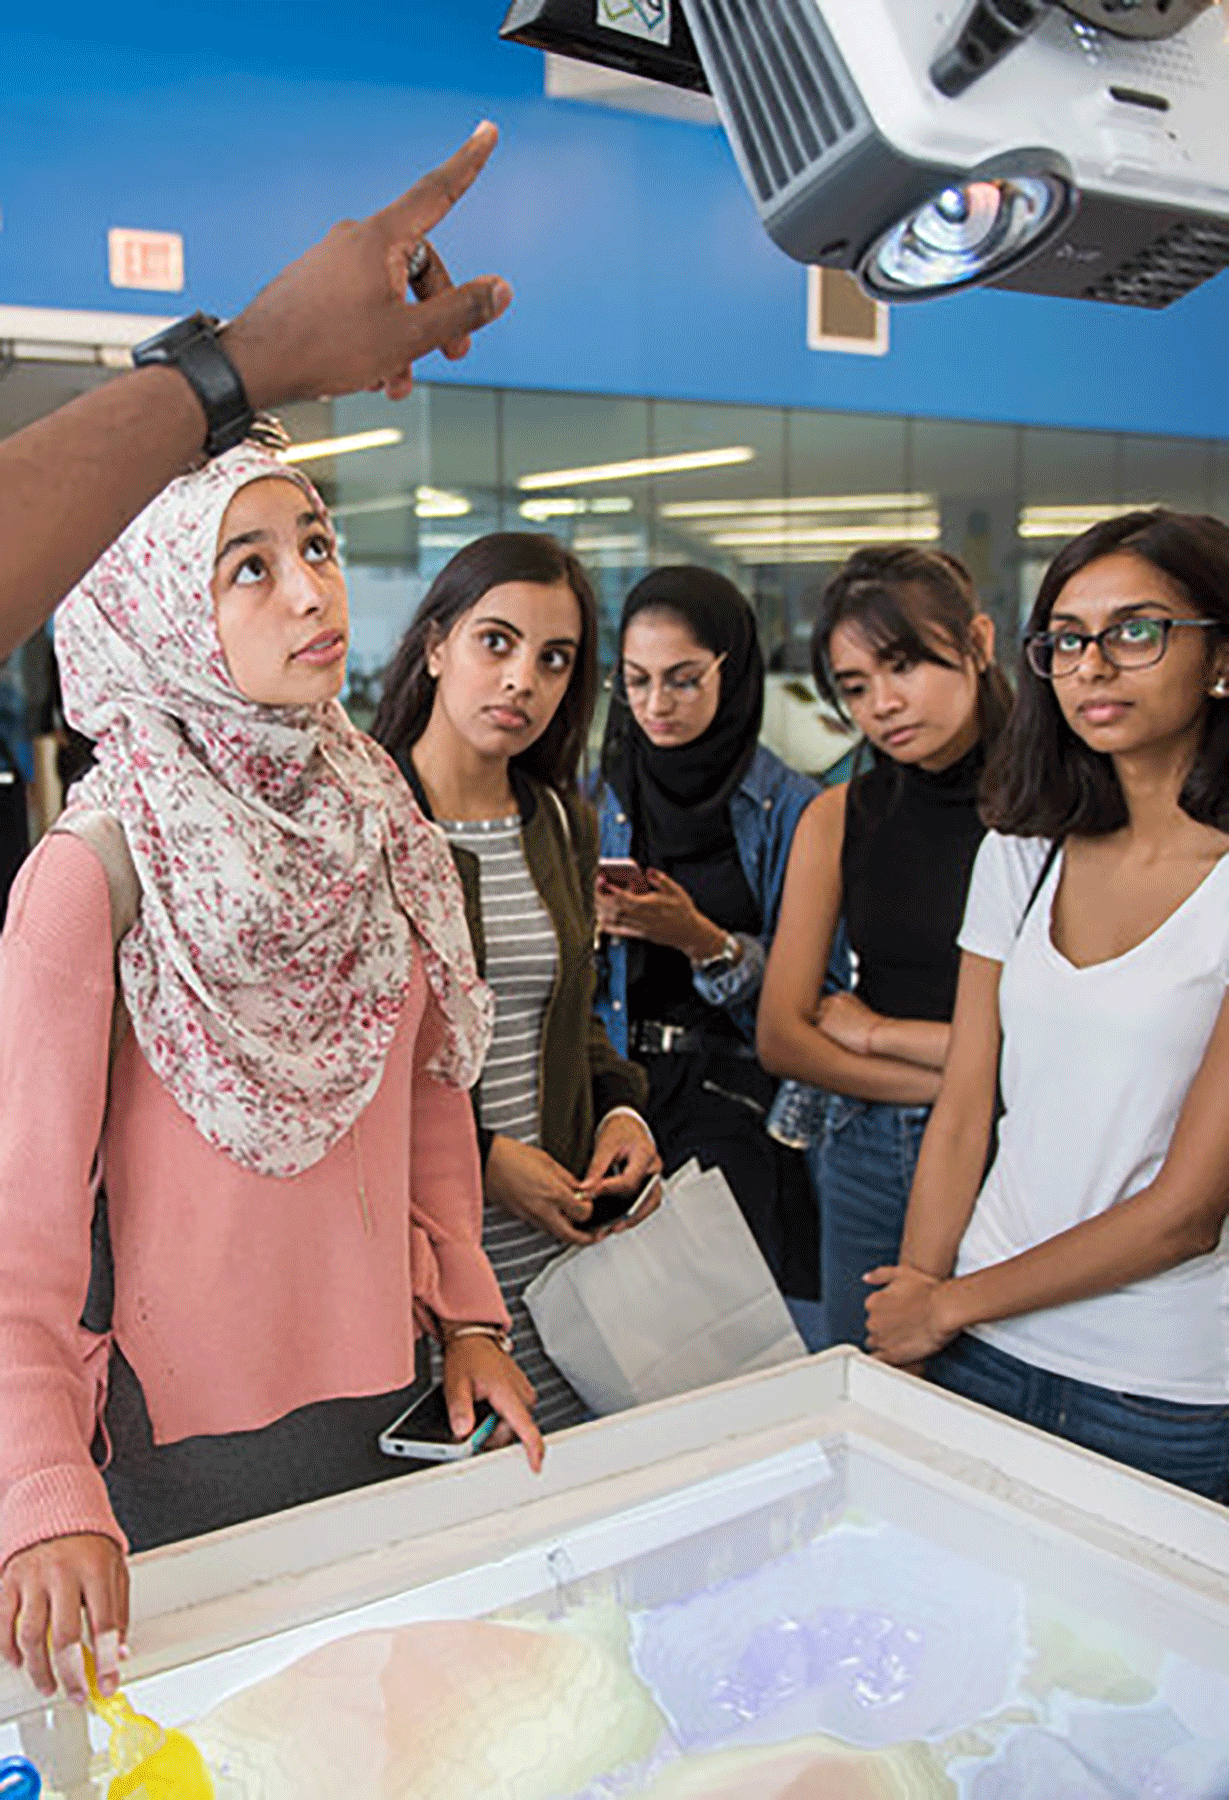 A diverse group of Ryerson students are being instructed on how to use classroom technology,